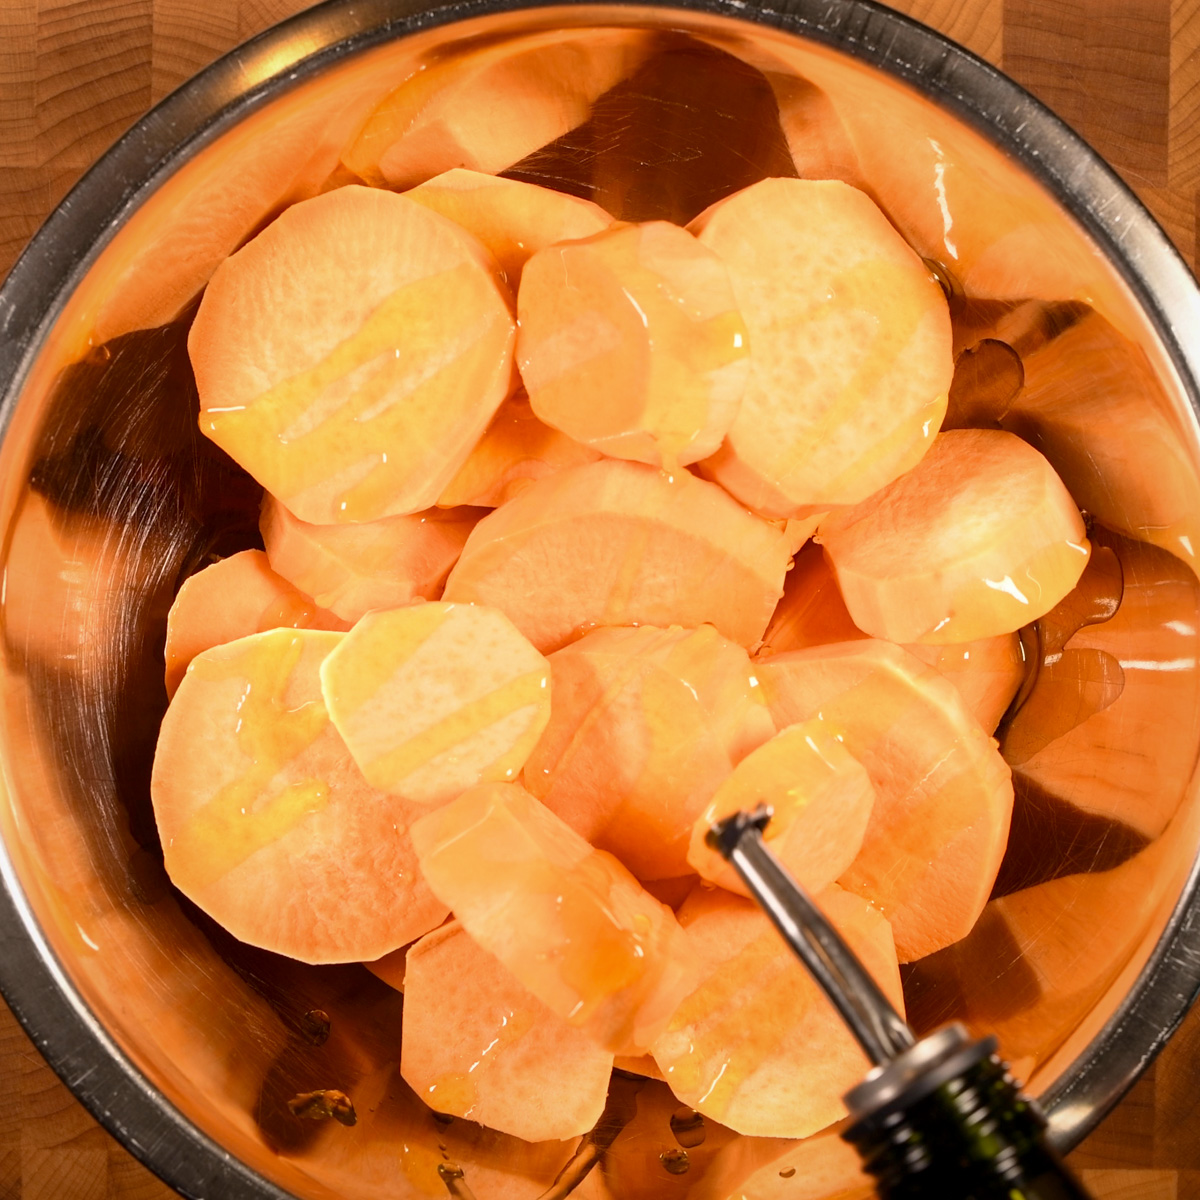 Coat the sweet potatoes with vegetable oil.